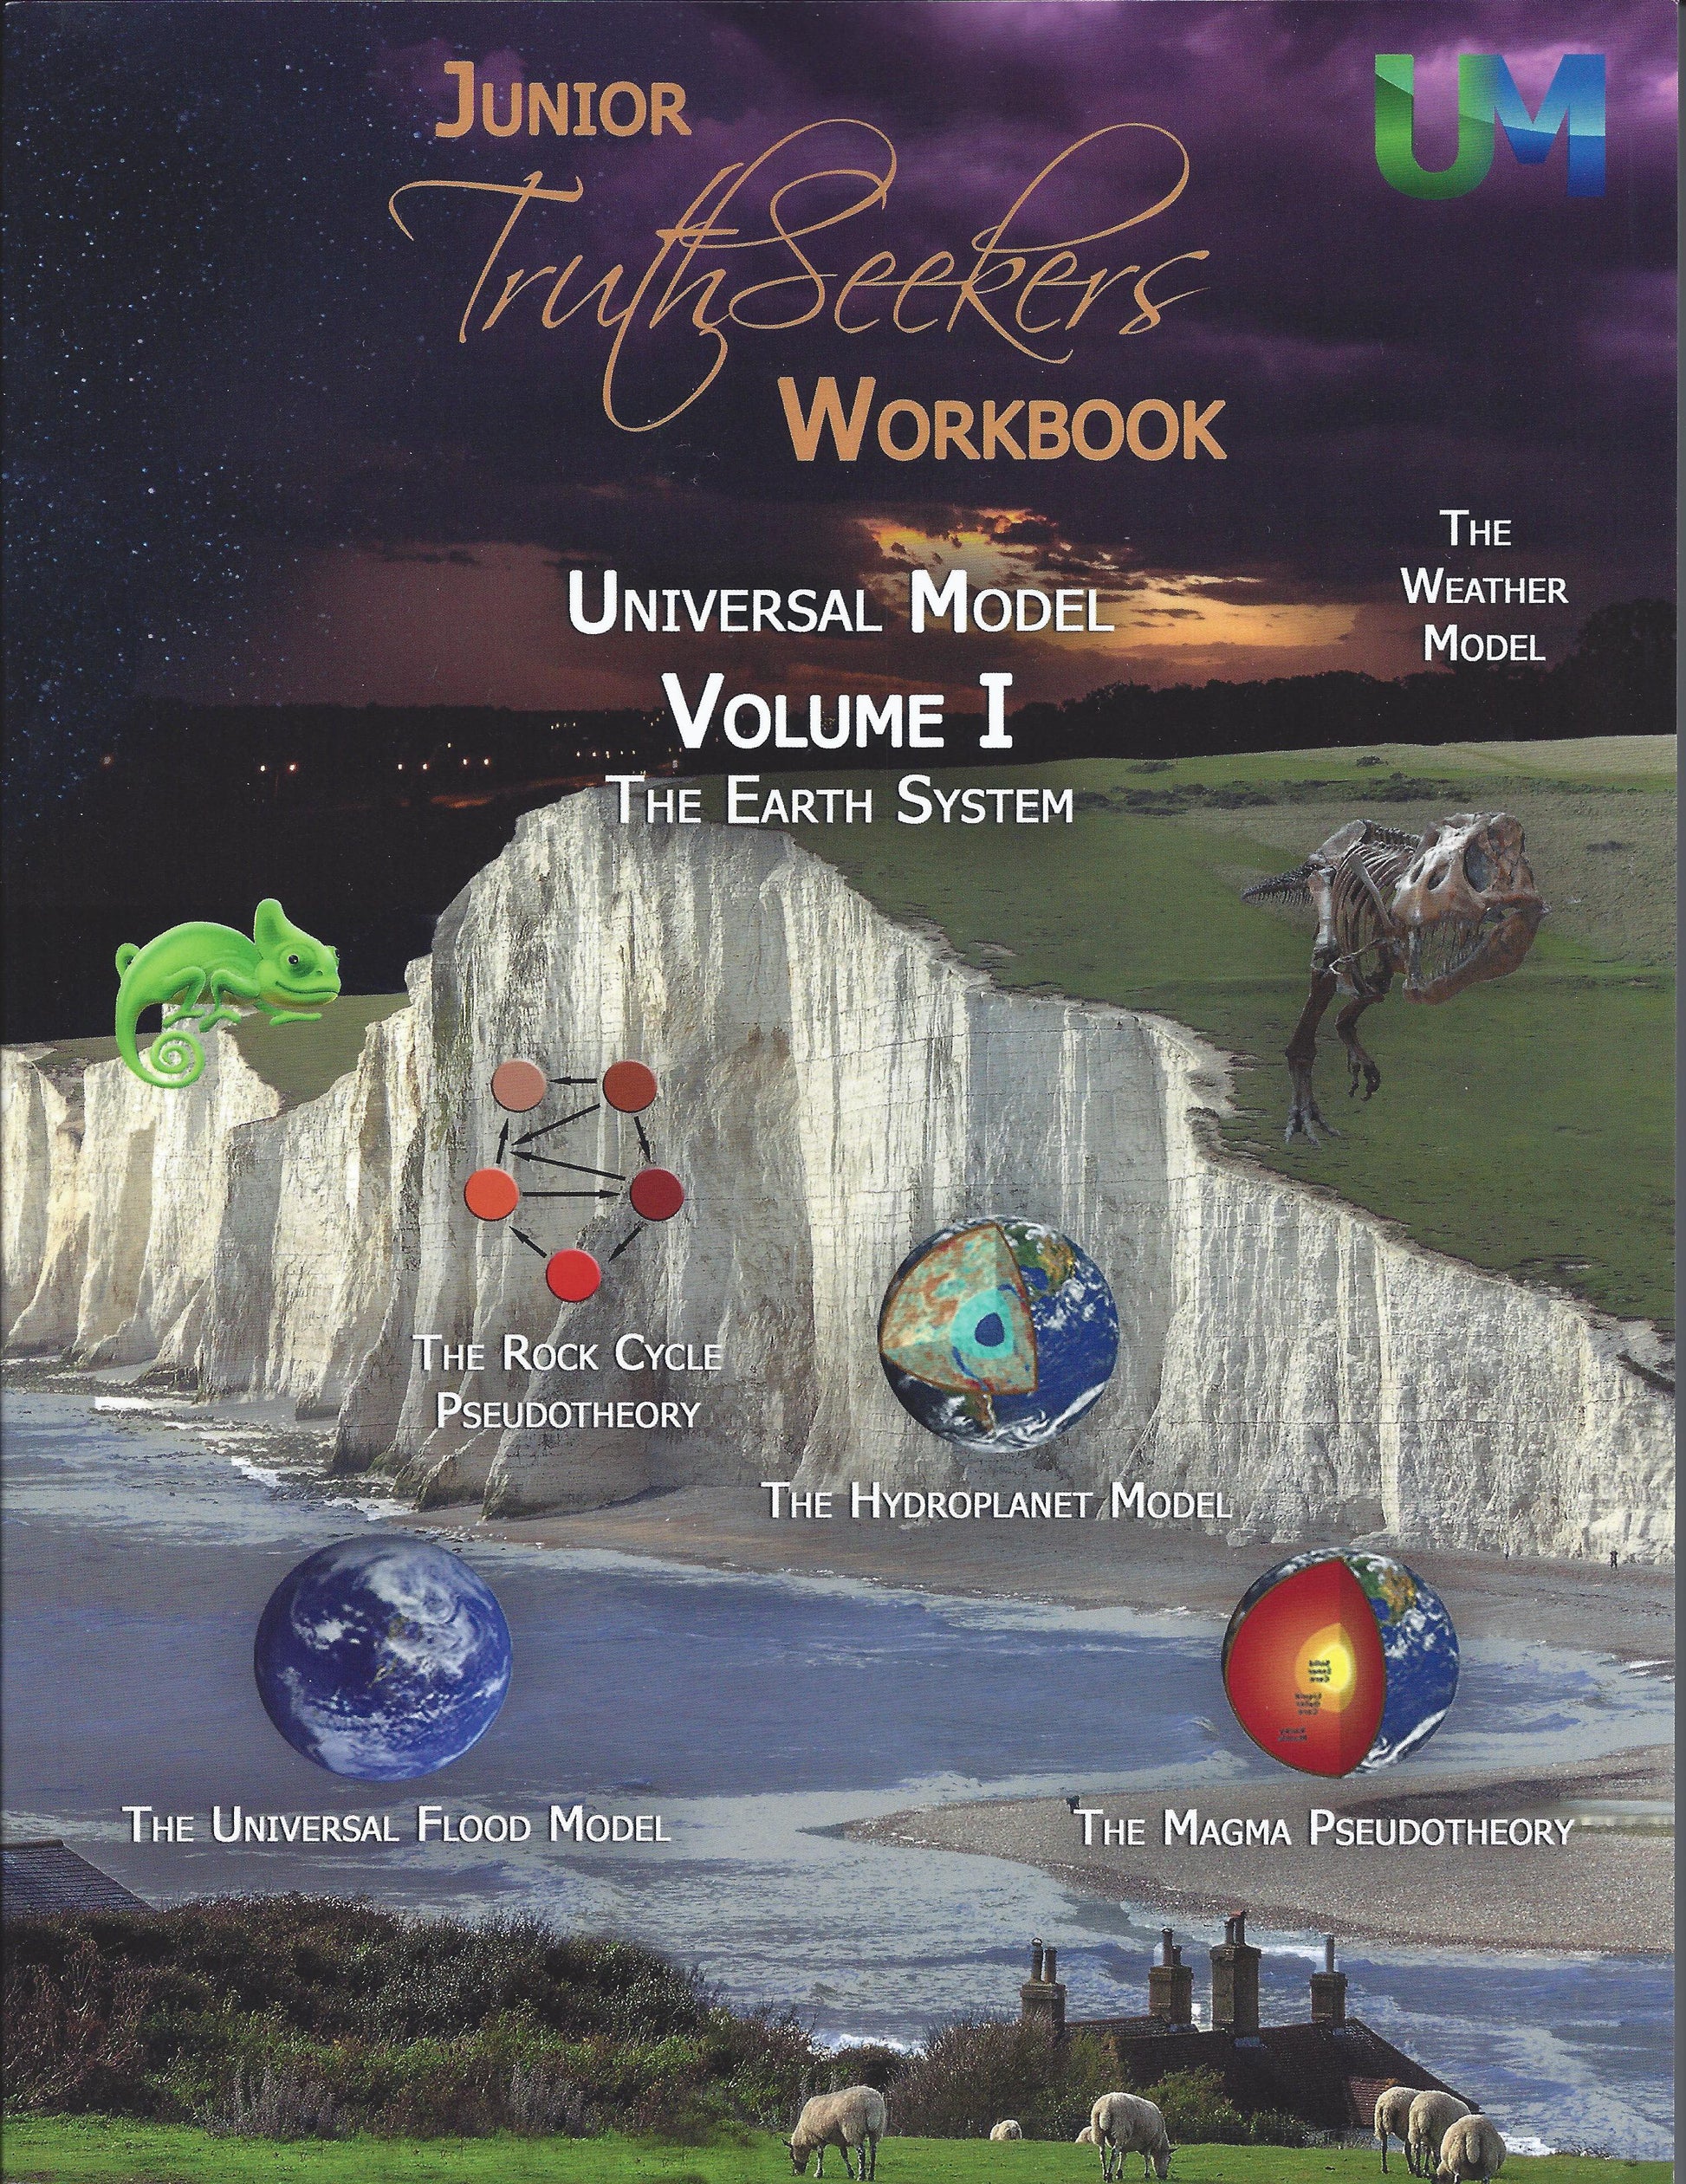 Junior Truthseekers Workbook for Universal Model, Volume 1: The Earth System